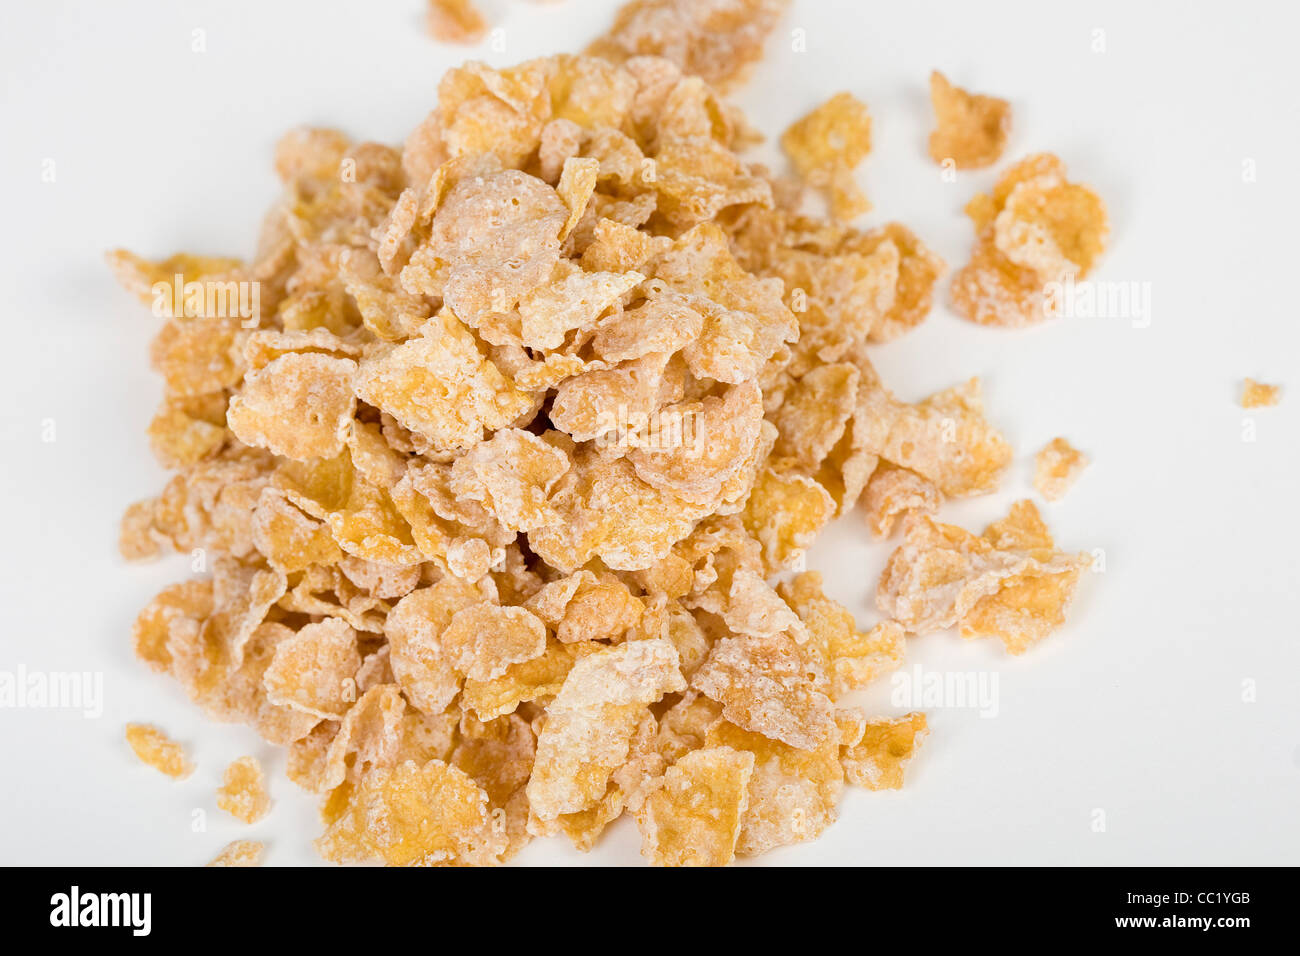 Frosted Flakes breakfast cereal. Stock Photo